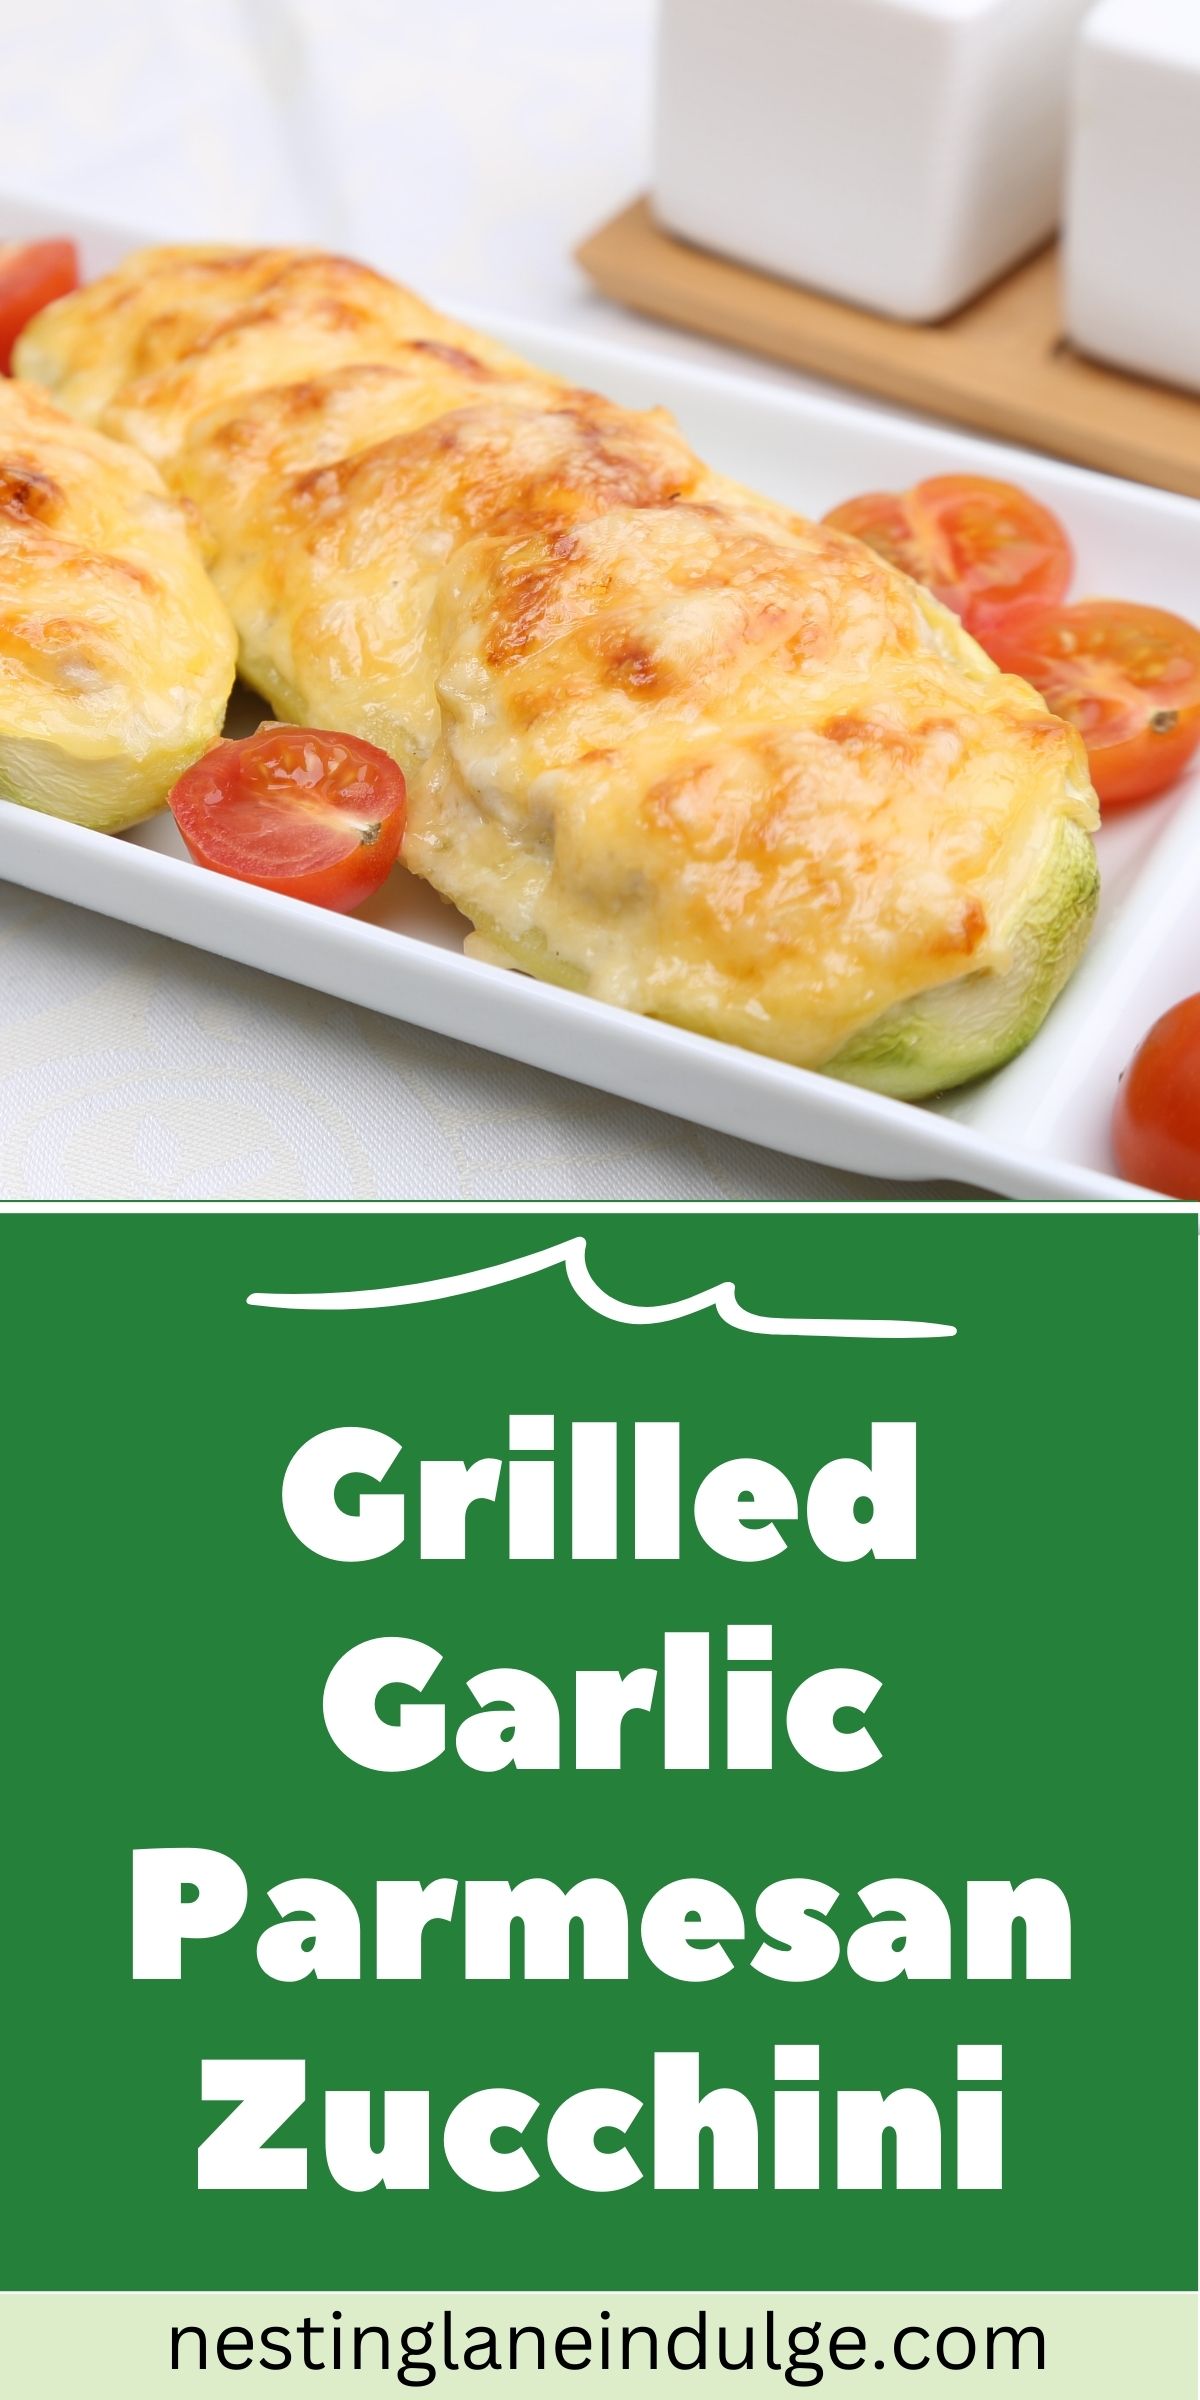 Graphic for Pinterest of Grilled Garlic Parmesan Zucchini Recipe.